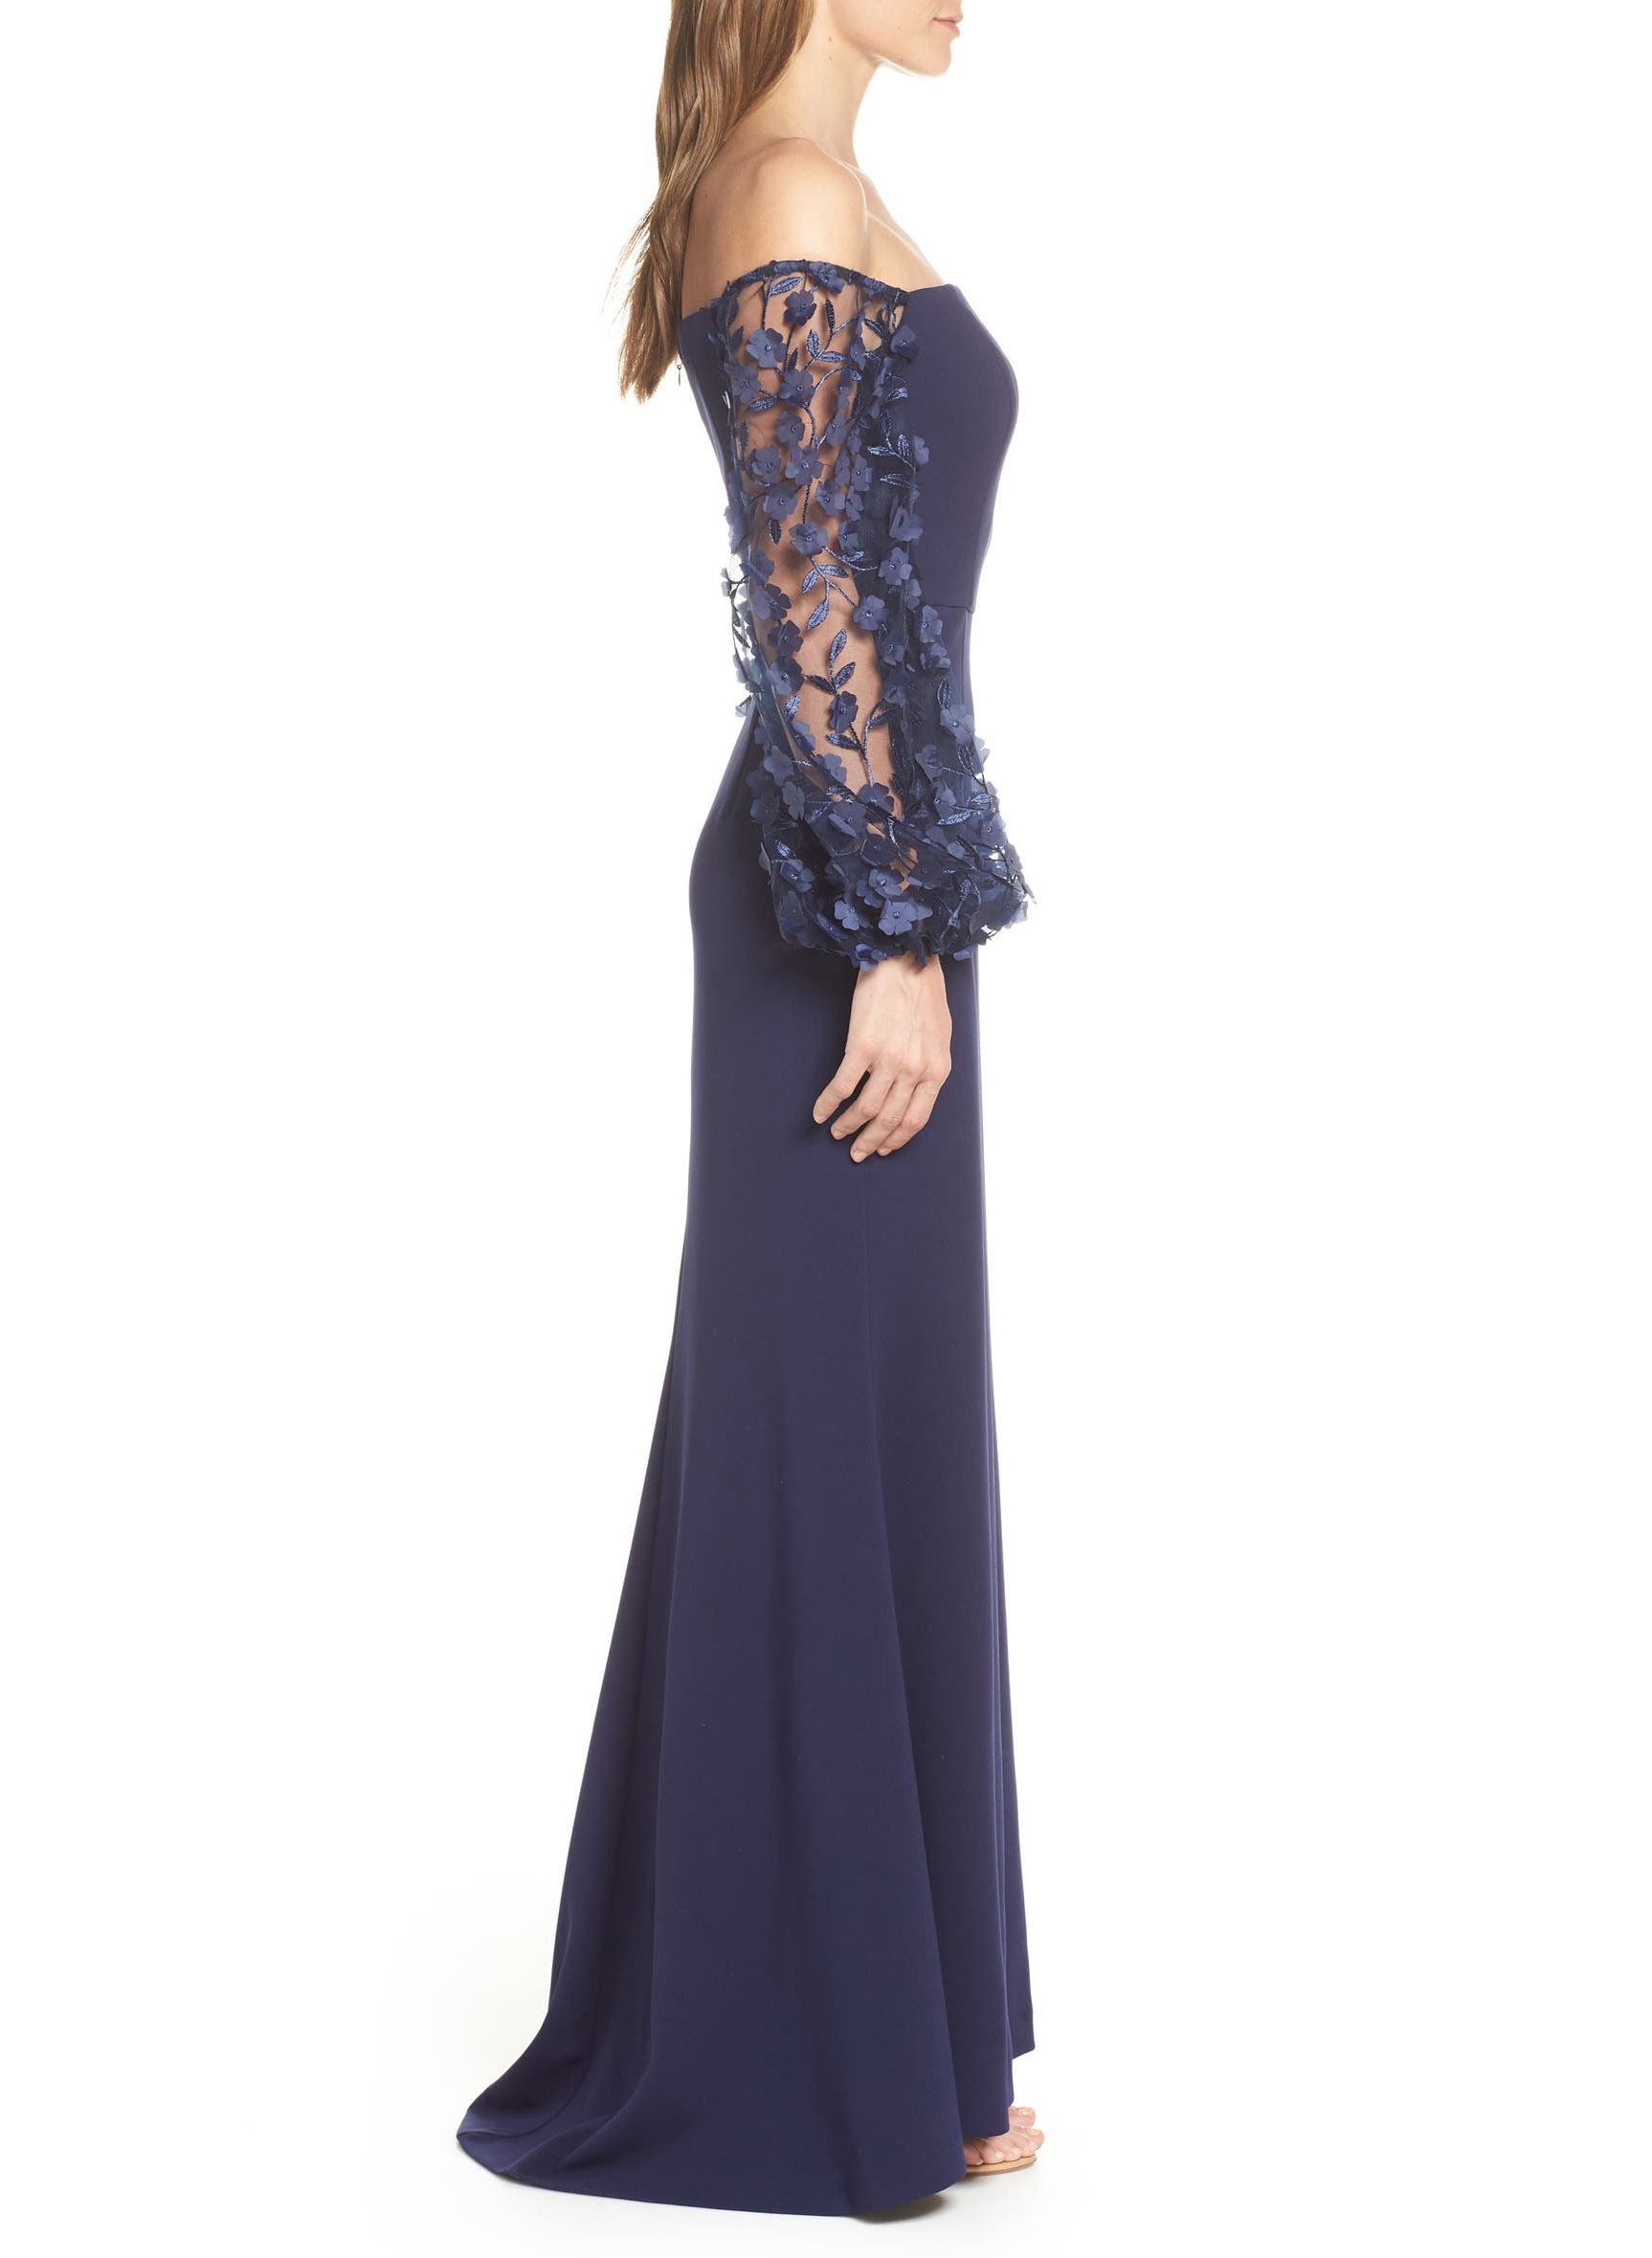 Lace Long Sleeves Off-The-Shoulder Sheath/Column Mother Of The Bride Dresses With Elastic Satin